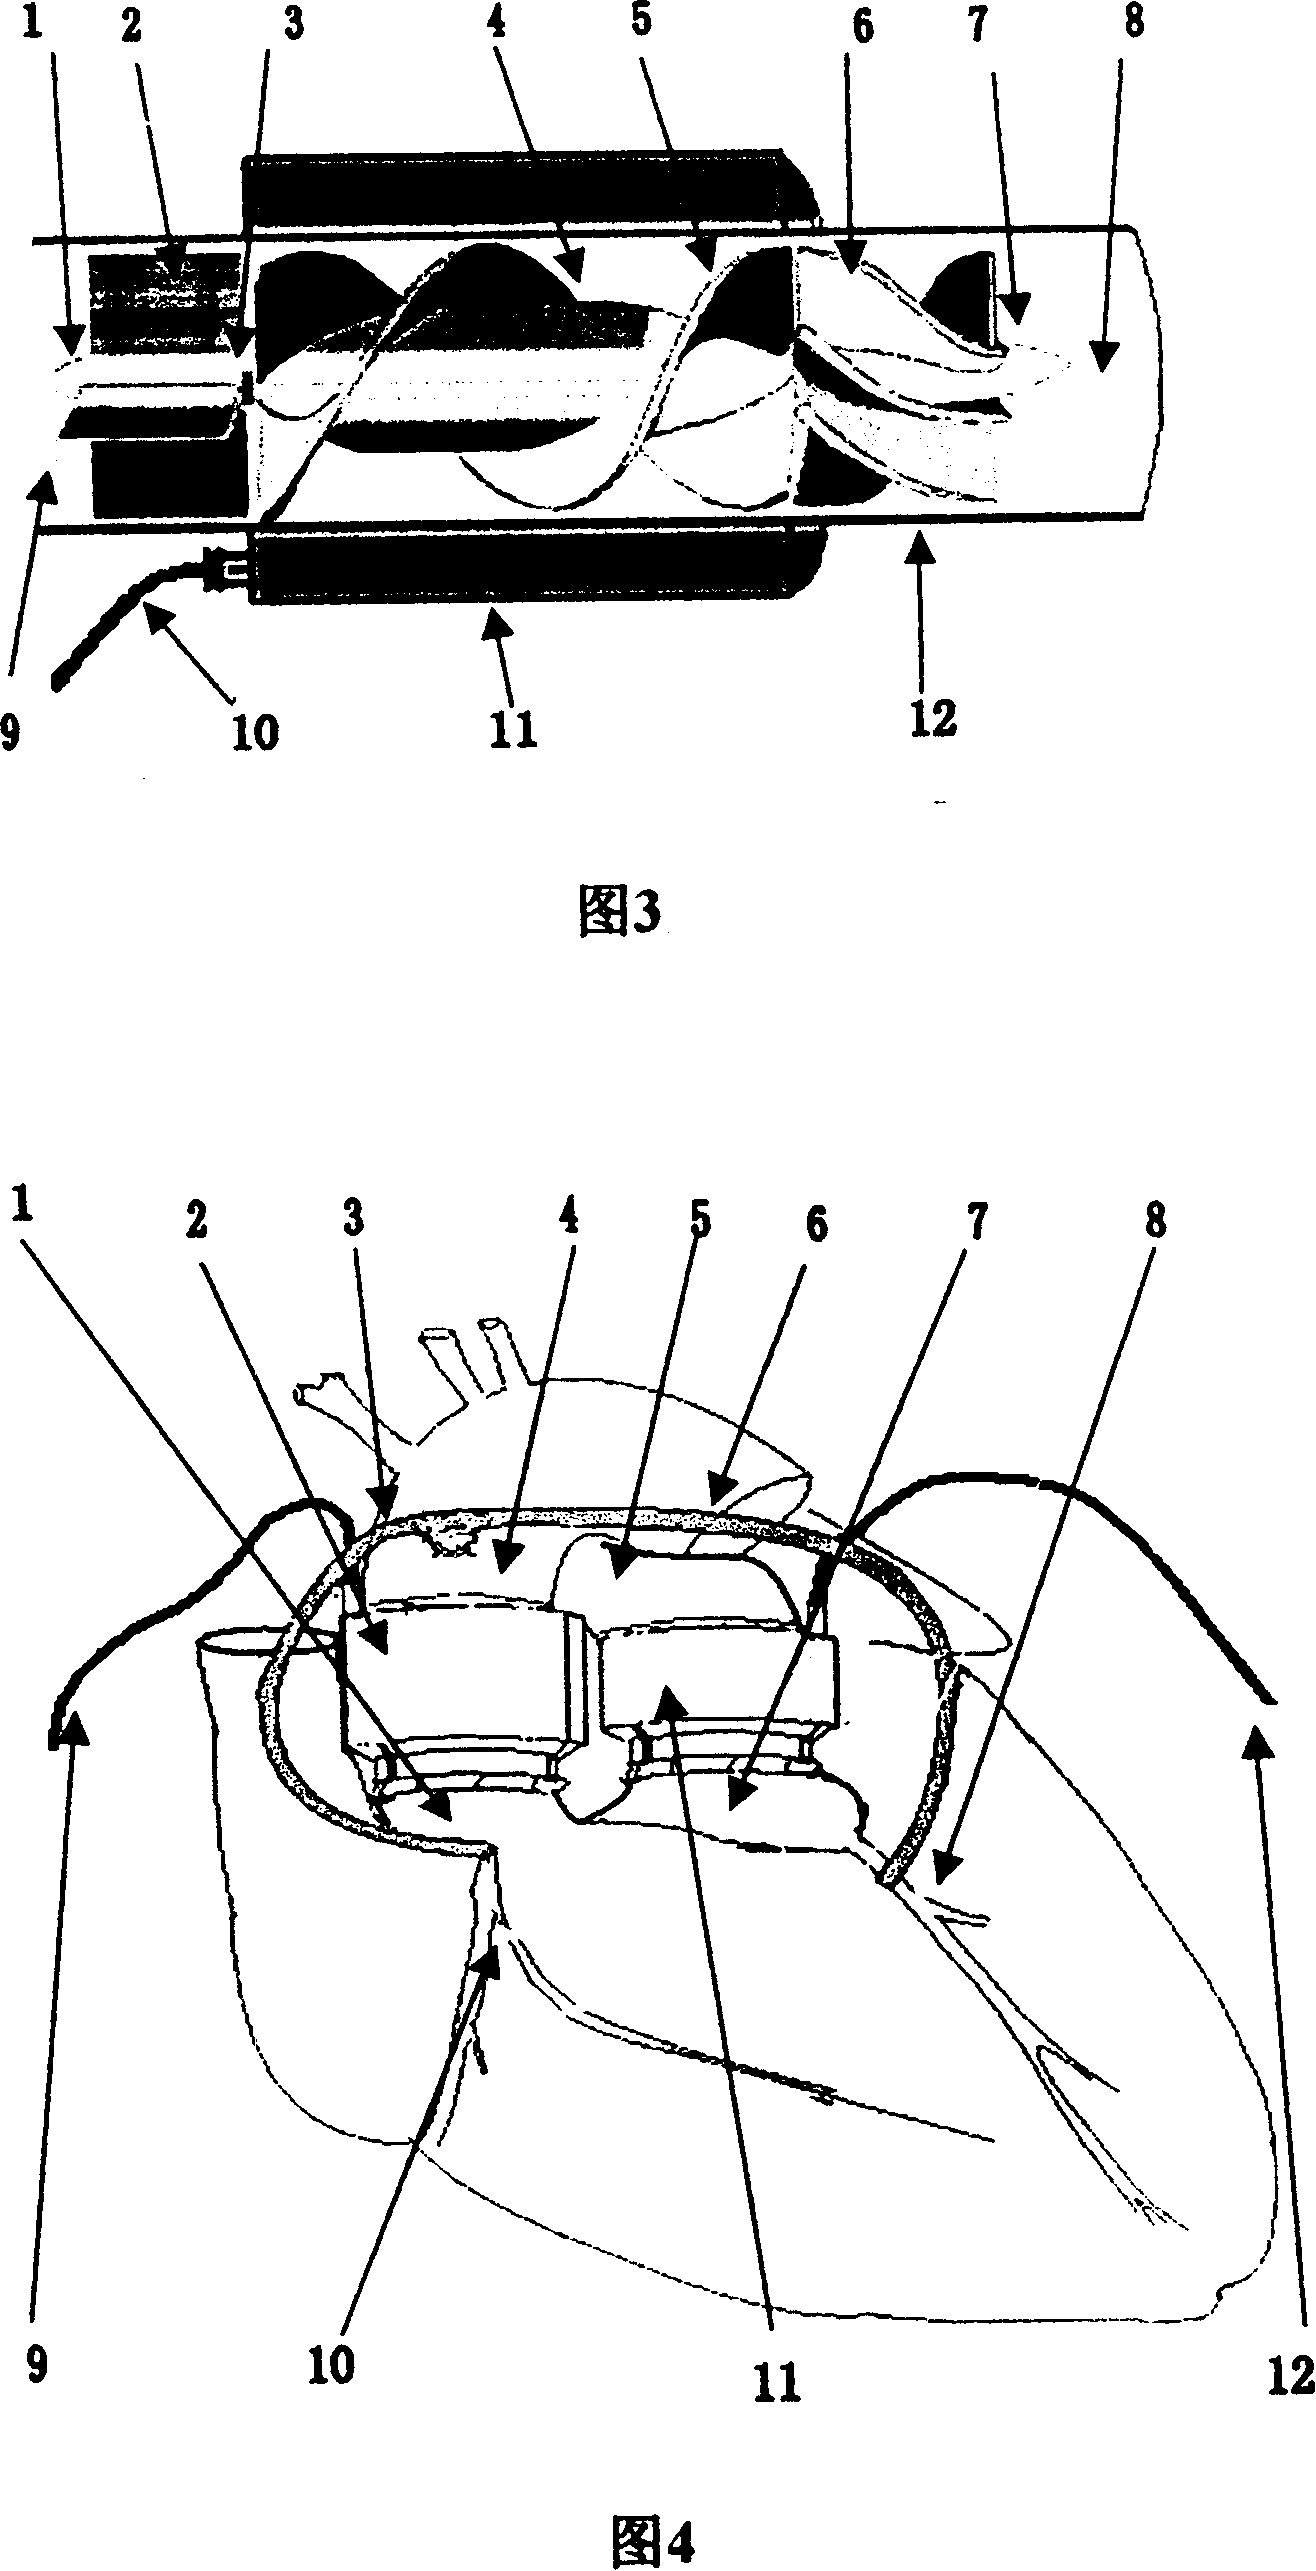 Sleeved type permanent magnetic impeller axial flow type blood pump for assisting heart and assisting method